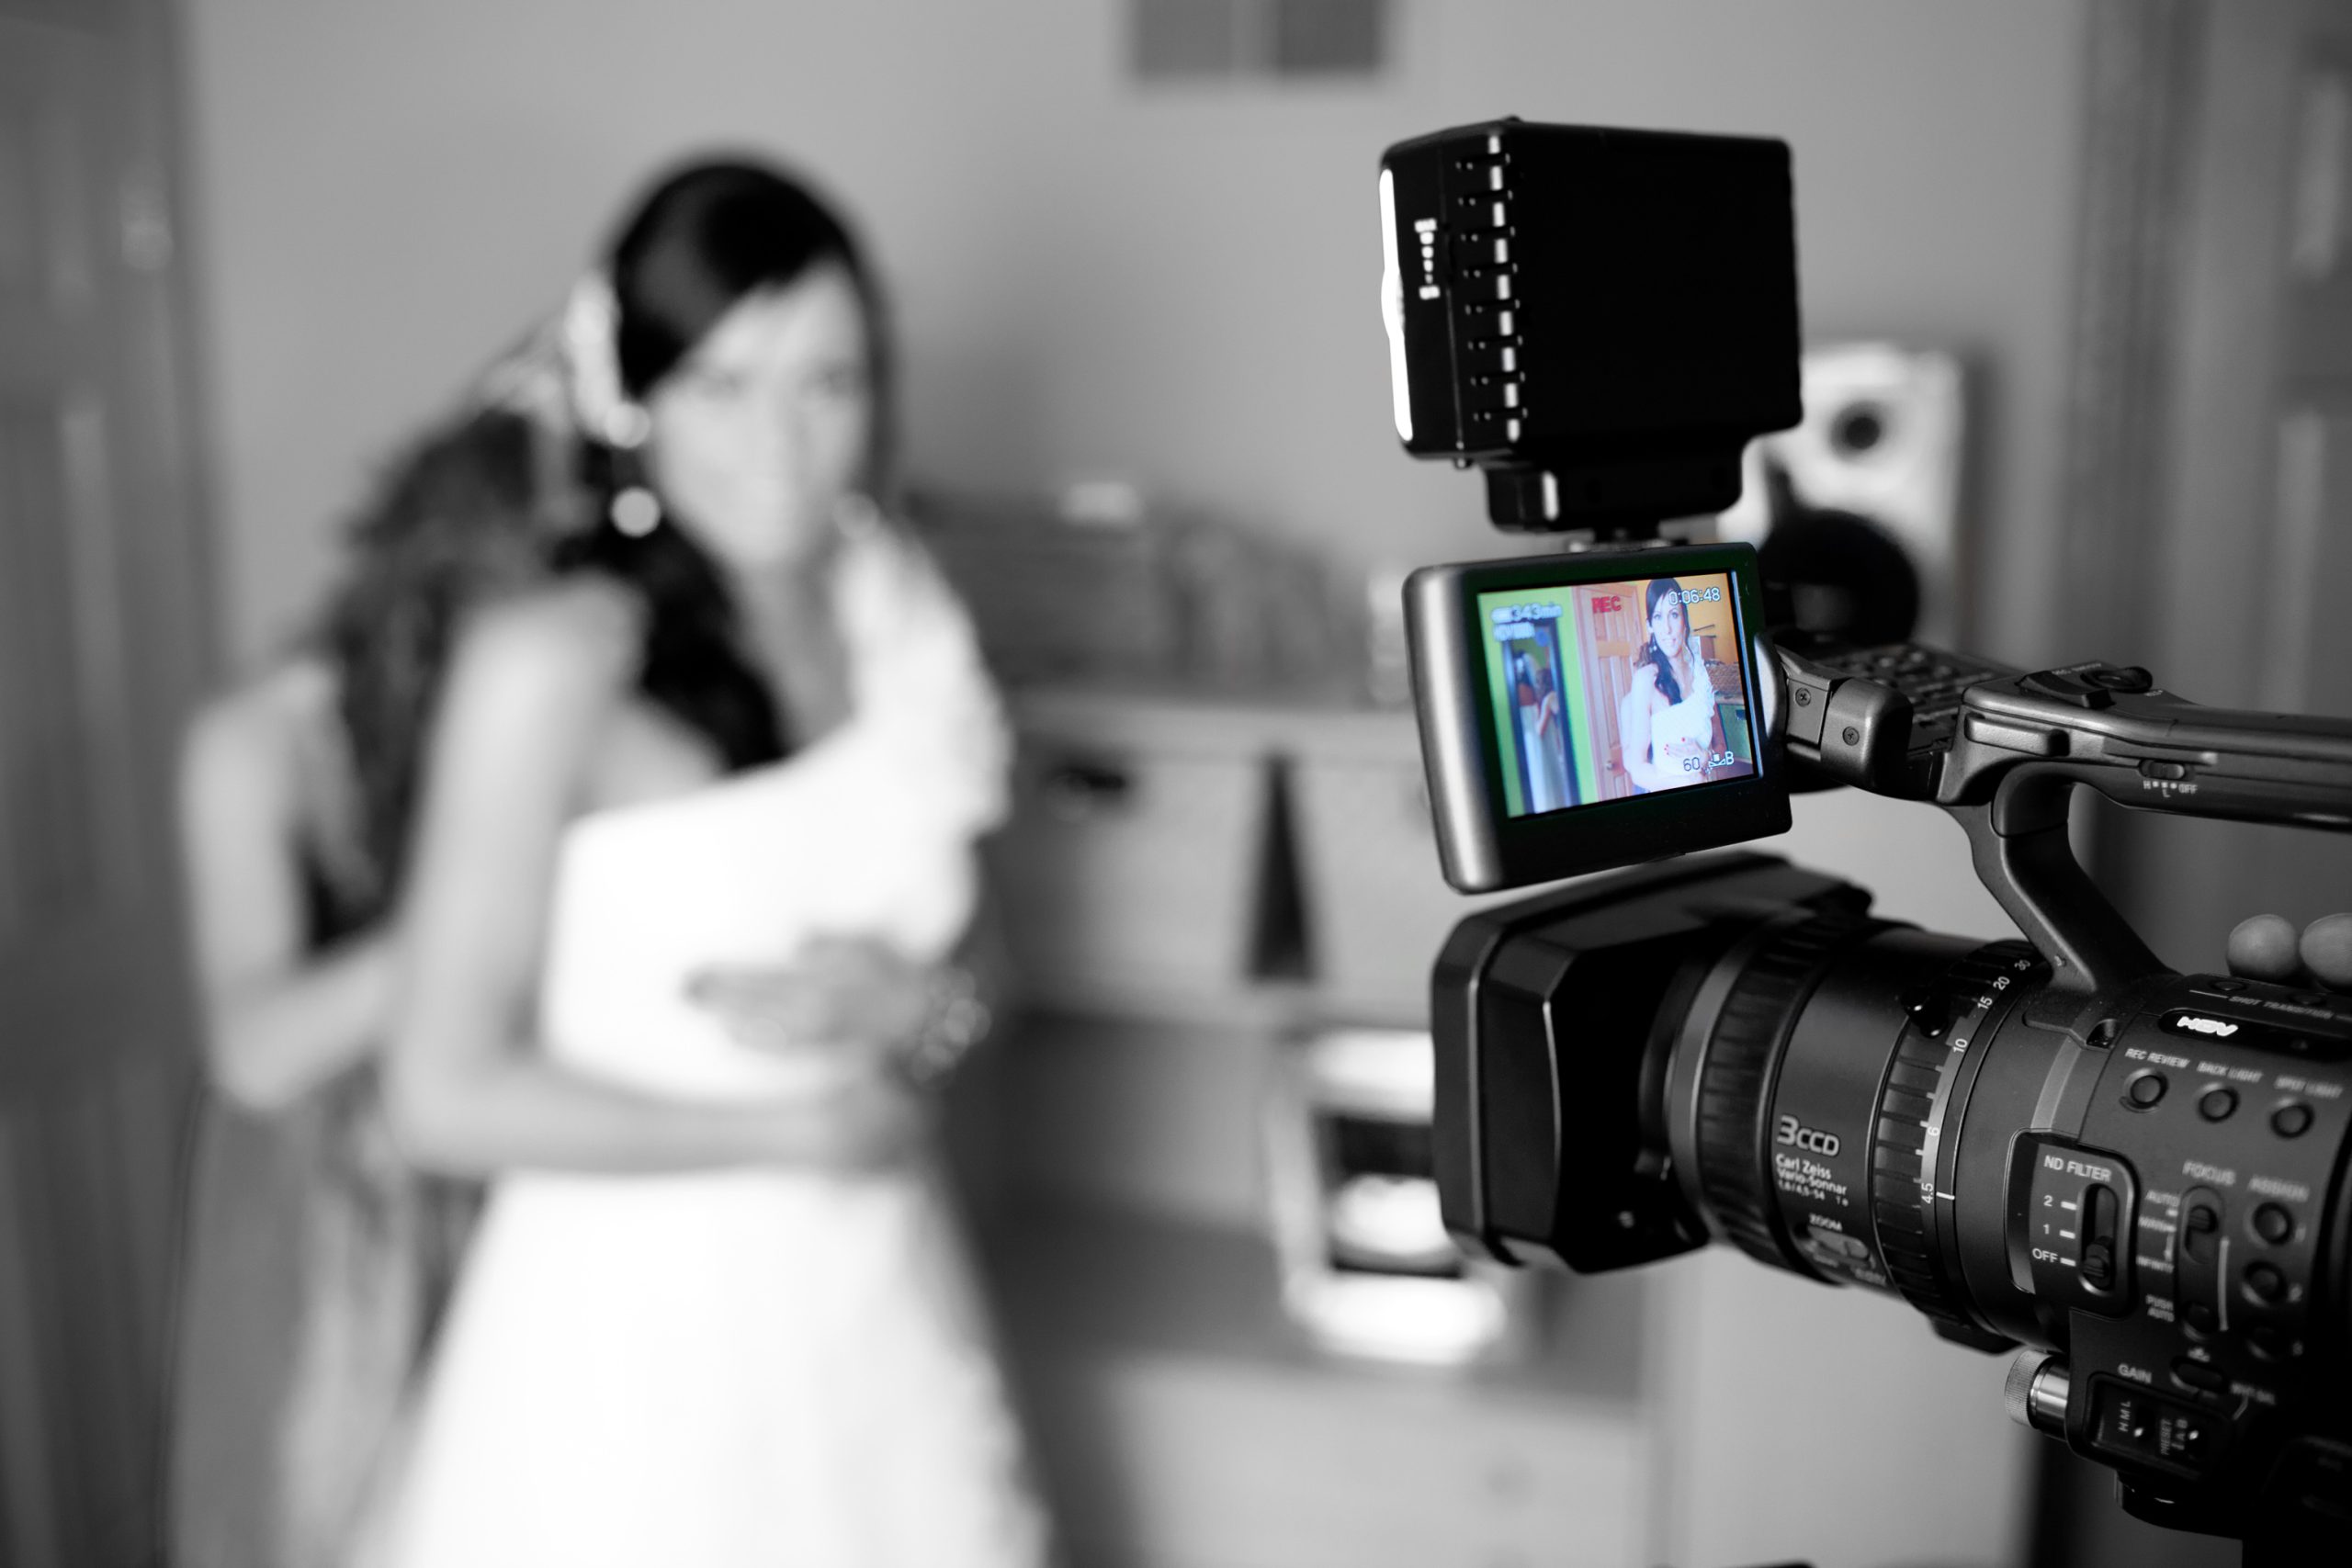 Hire Photography and Videography From The Same Company